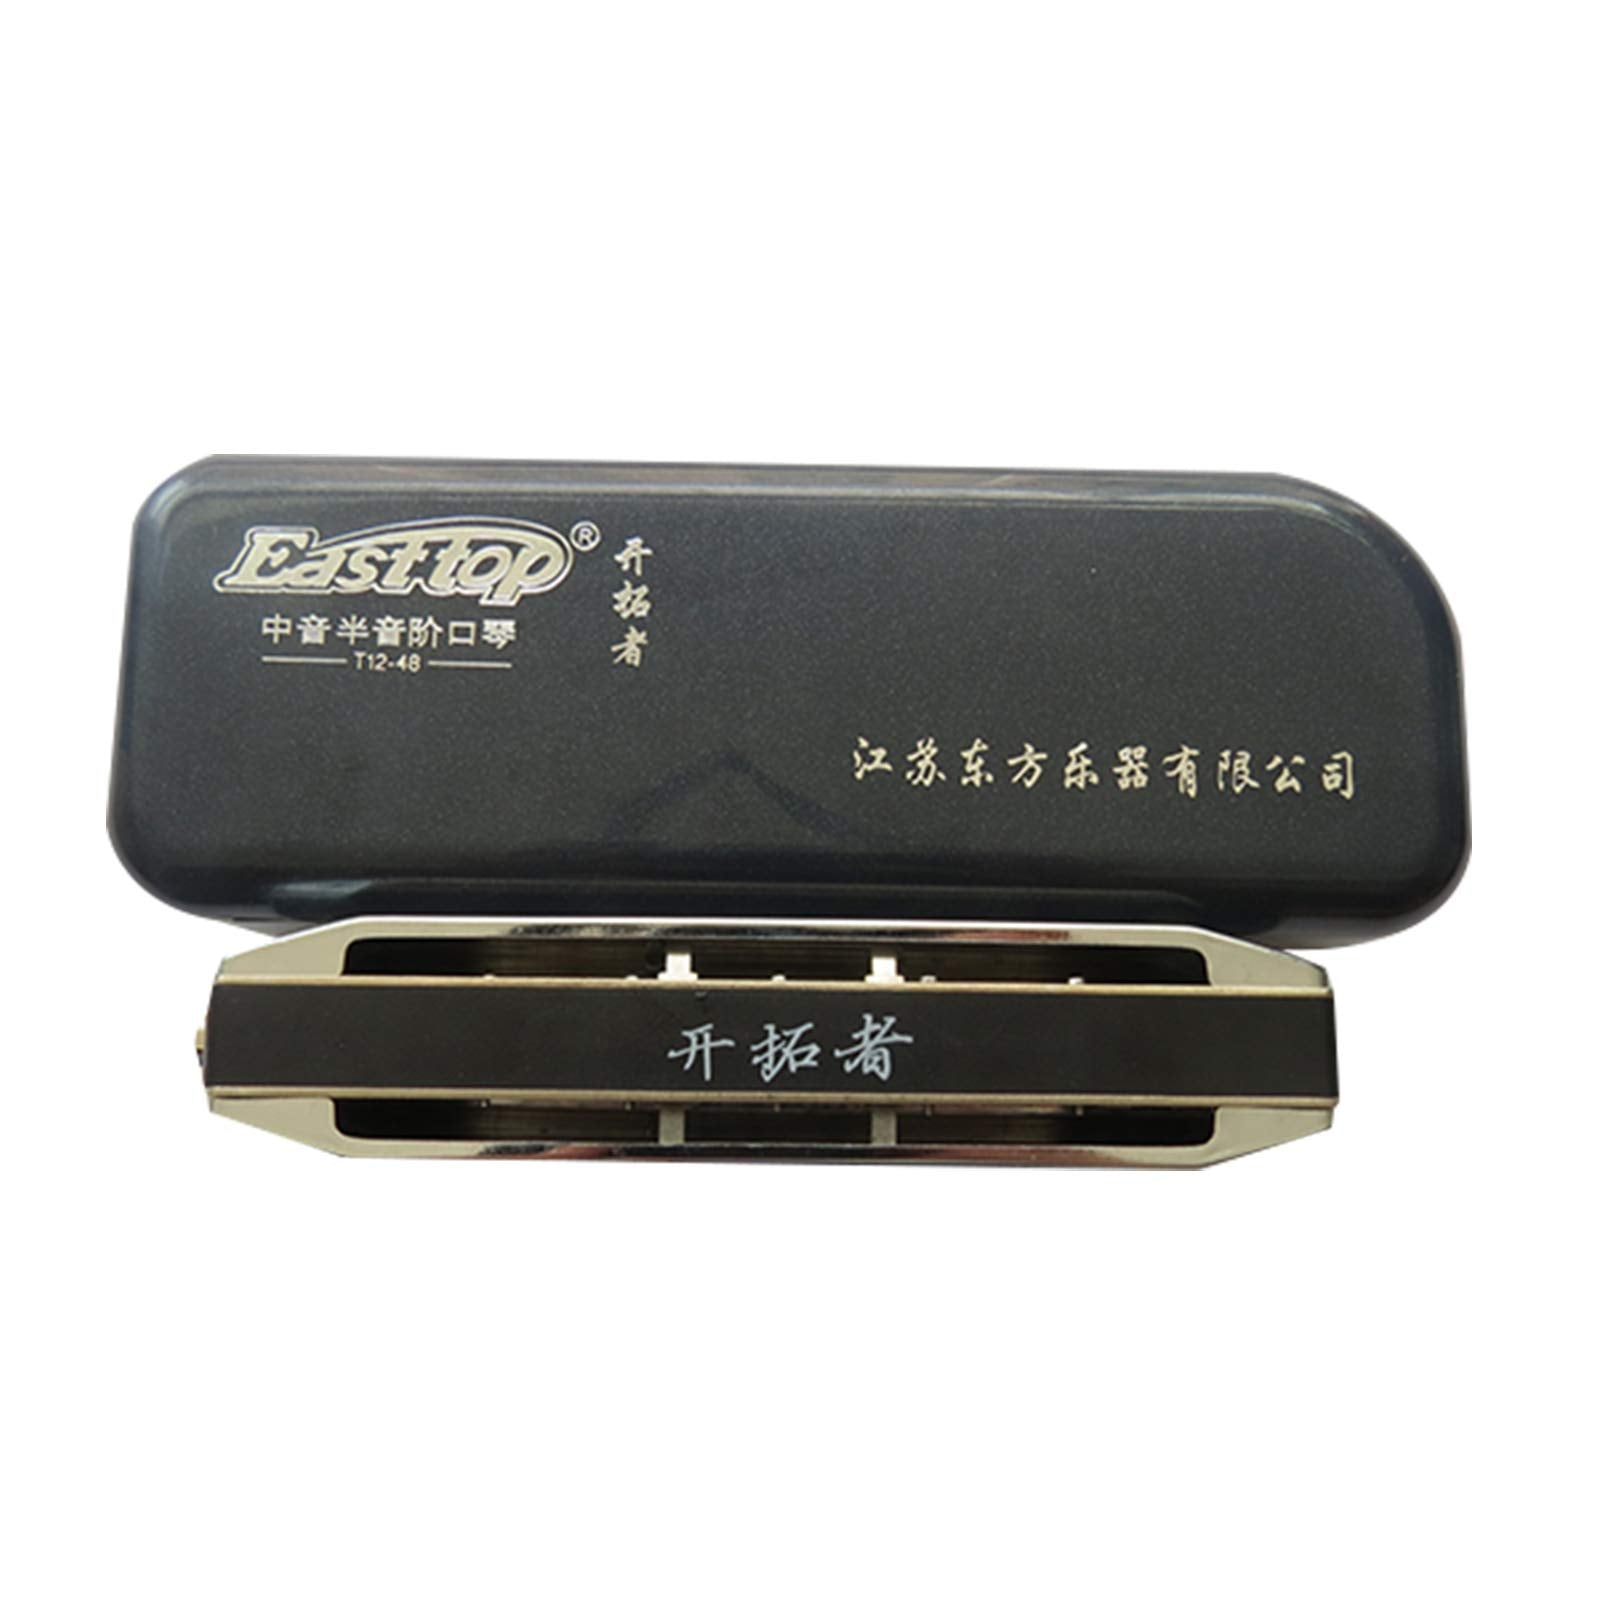 East top 12 Hole Chromatic Harmonica key of Low C, 48 Tones Chromatic Mouth Organ Harmonica For Adults, Professionals and Students(48Z) - Easttop harmonica